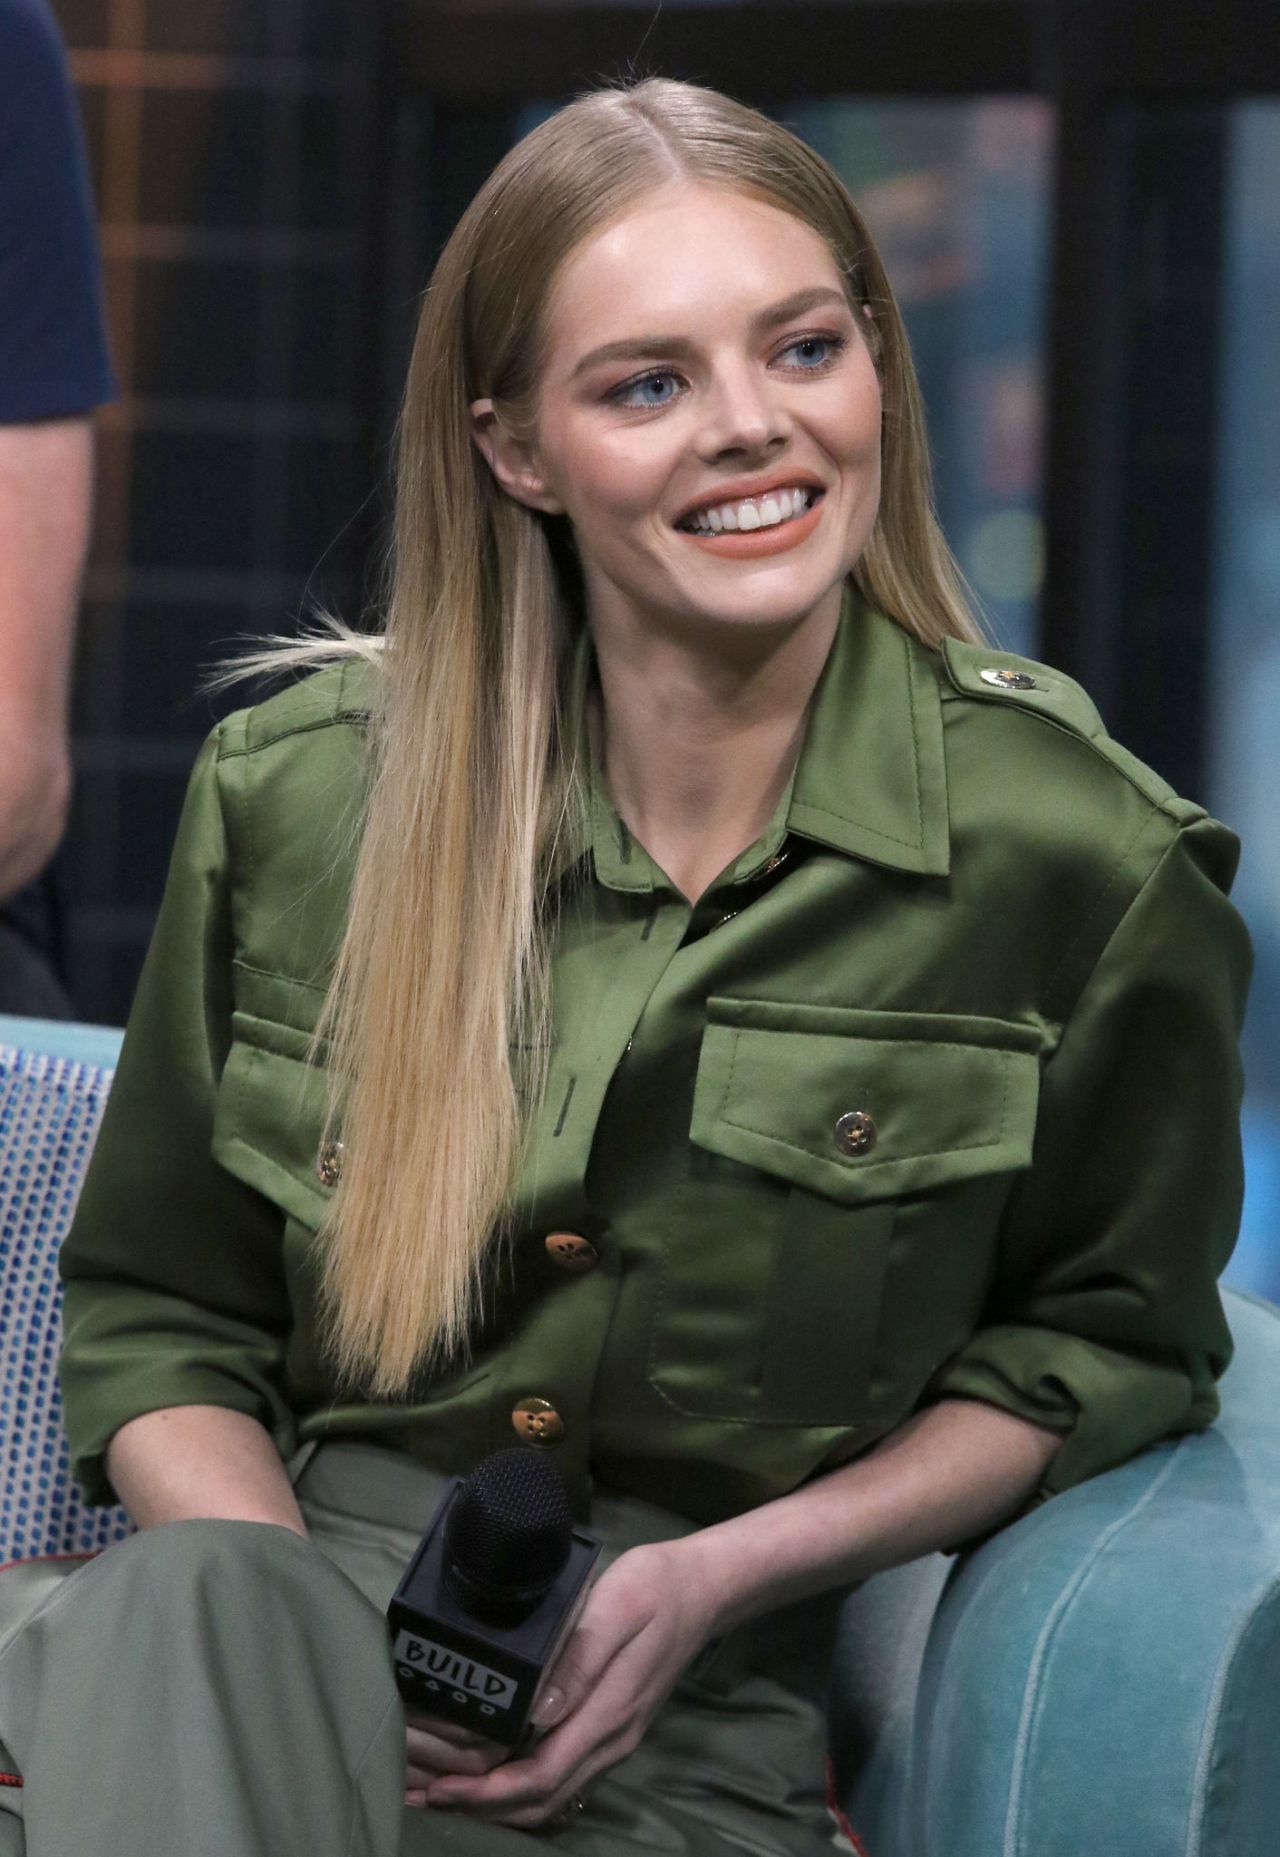 samara-weaving-discussing-ready-or-not-at-build-studio-in-nyc-08-22-2019-4.jpg